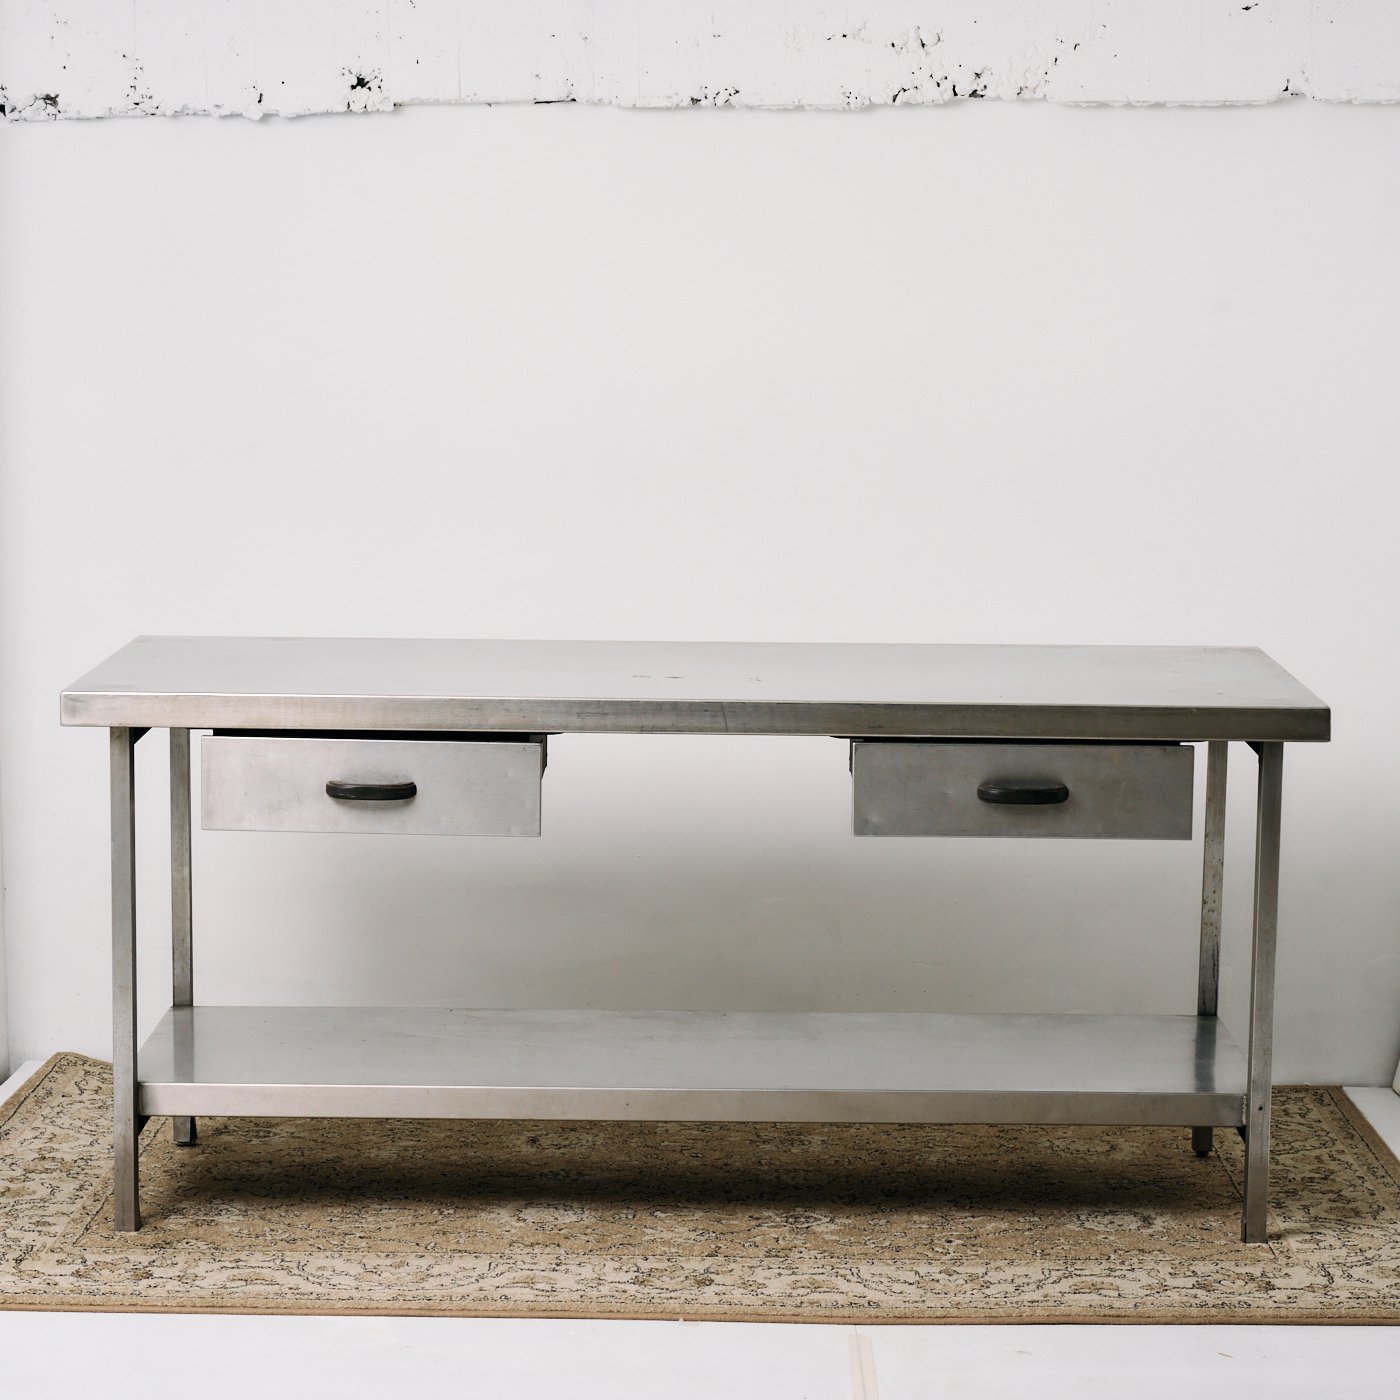 STAINLESS KITCHEN TABLE - POINT NO.39｜東京｜目黒｜真鍮照明｜ヴィンテージ家具 キッチンテーブル